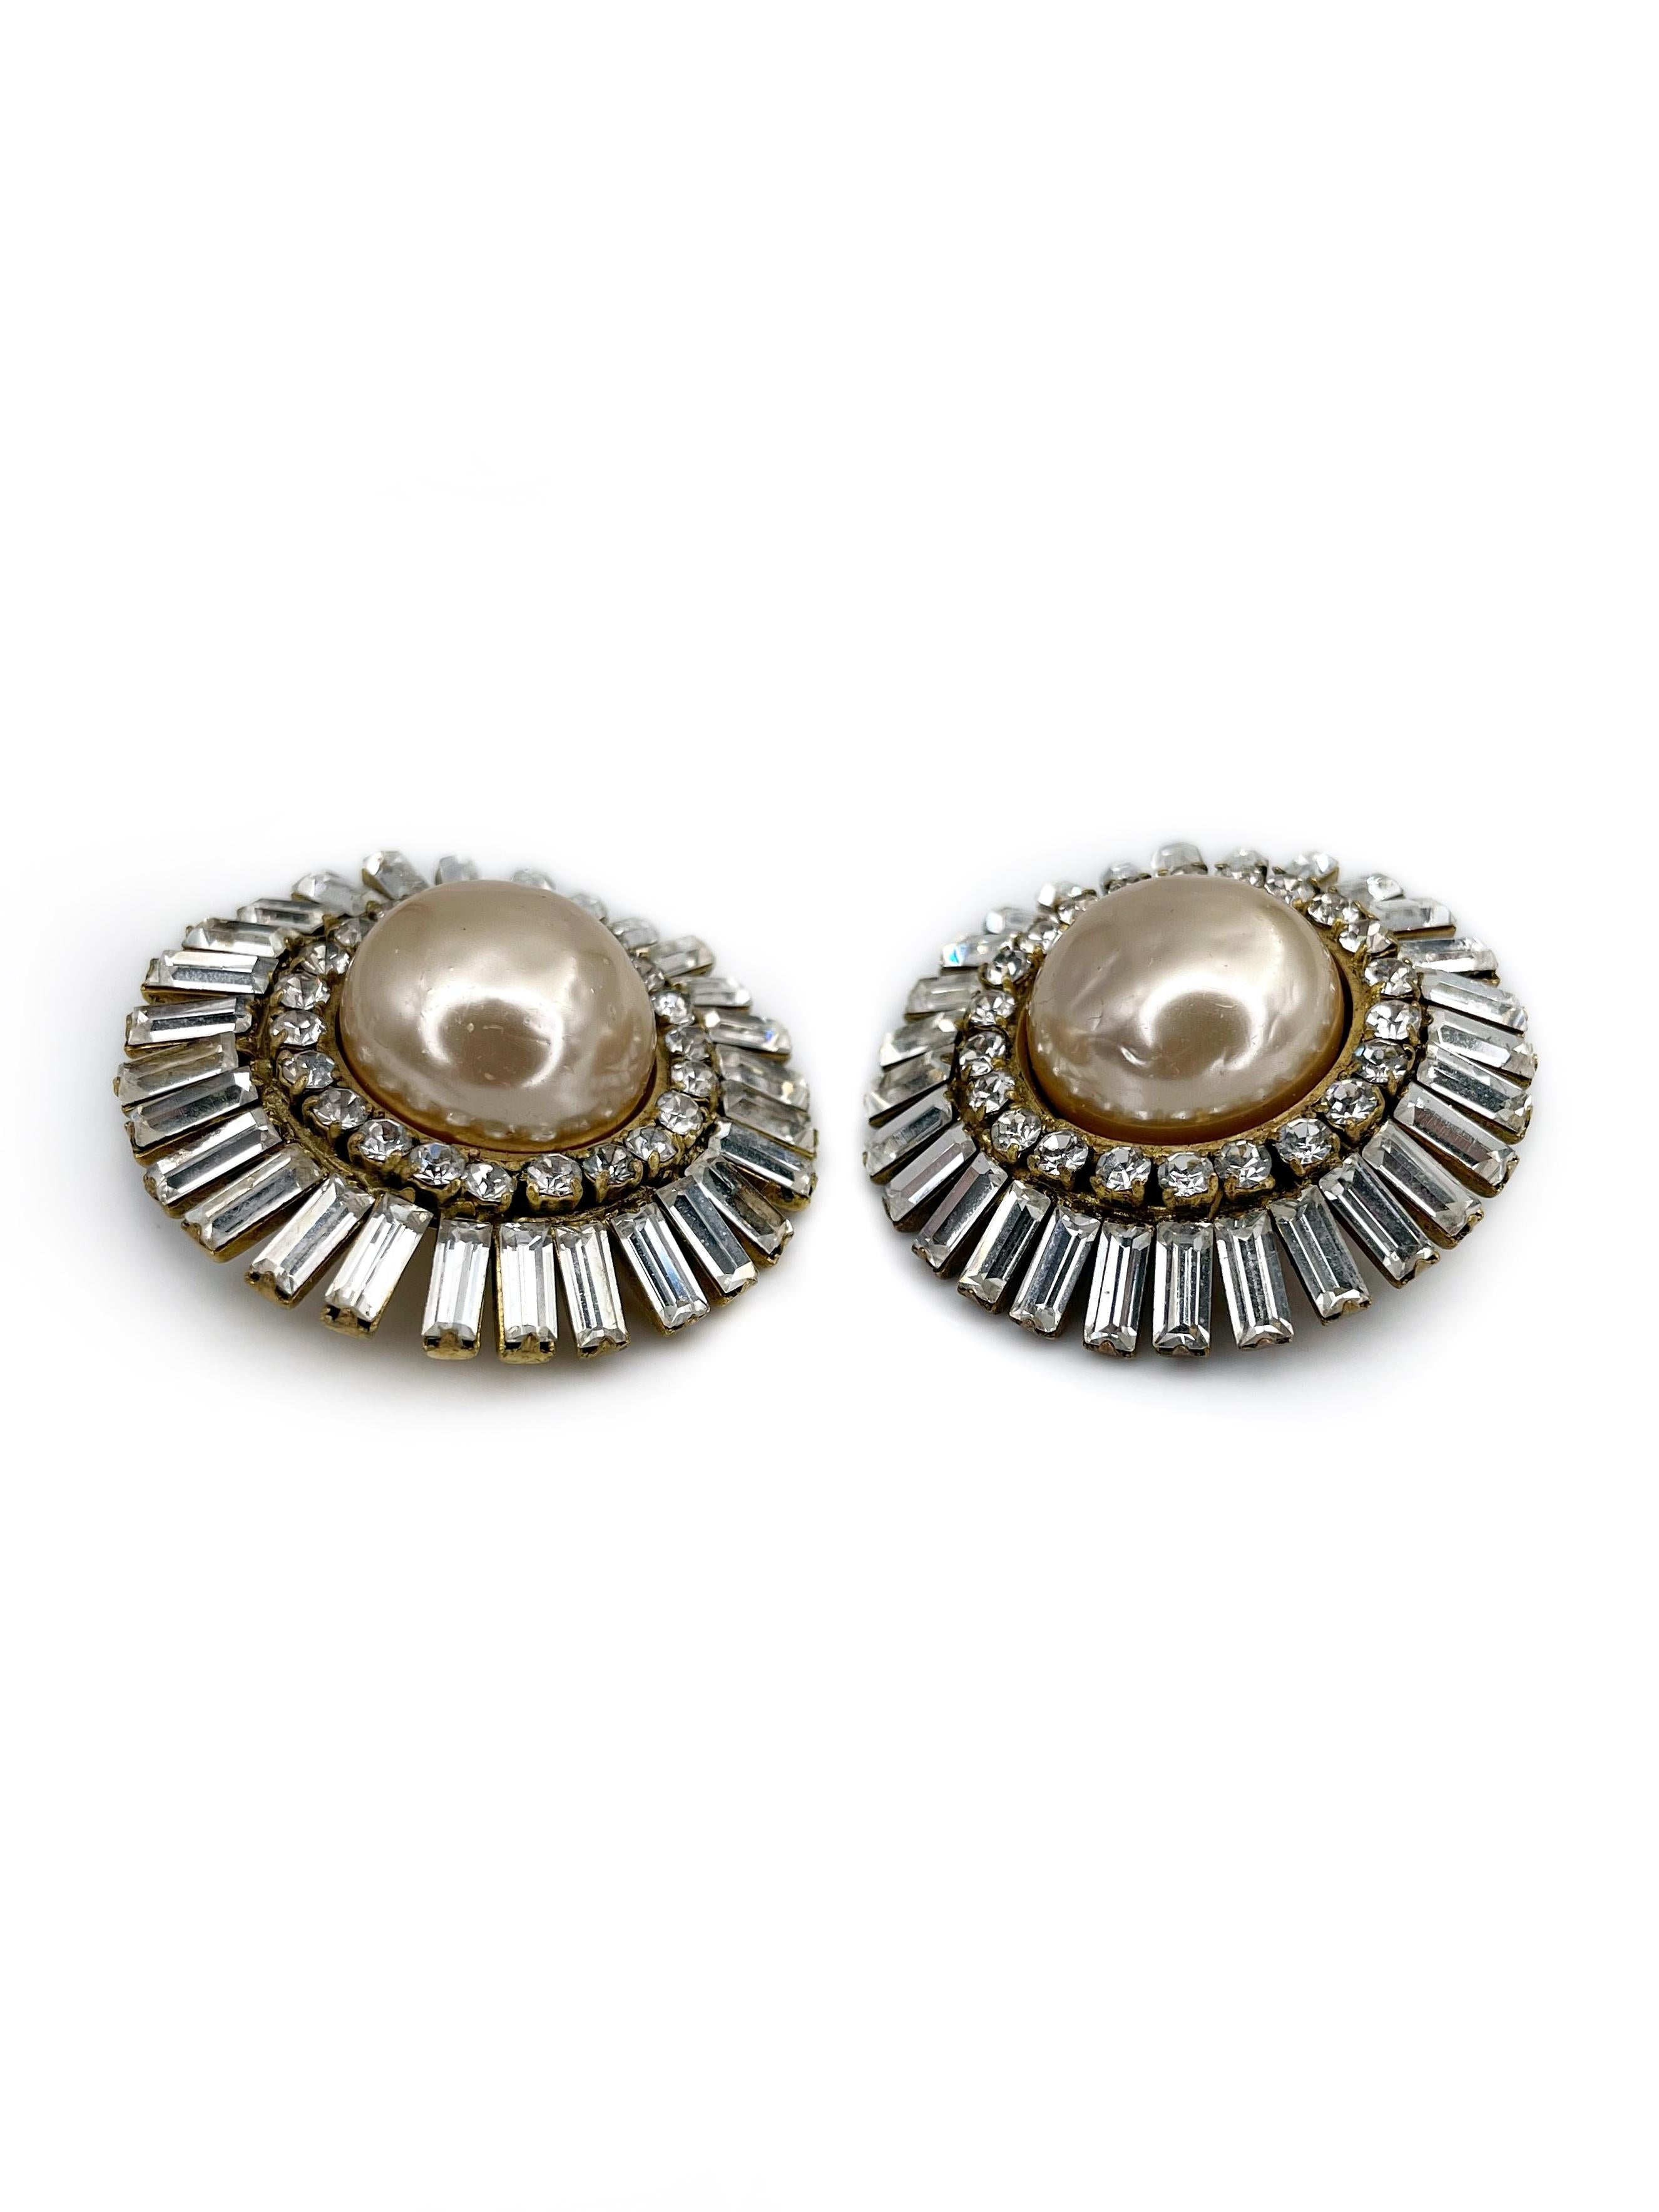 This is an amazing pair of large round clip on earrings designed by Chanel in 1970’s. It features creamy faux pearls and shiny clear crystals of mixed cut. 

One of the earrings back is rubbed off (can be see in photos). 

Signed: “ ©Chanel®. Made